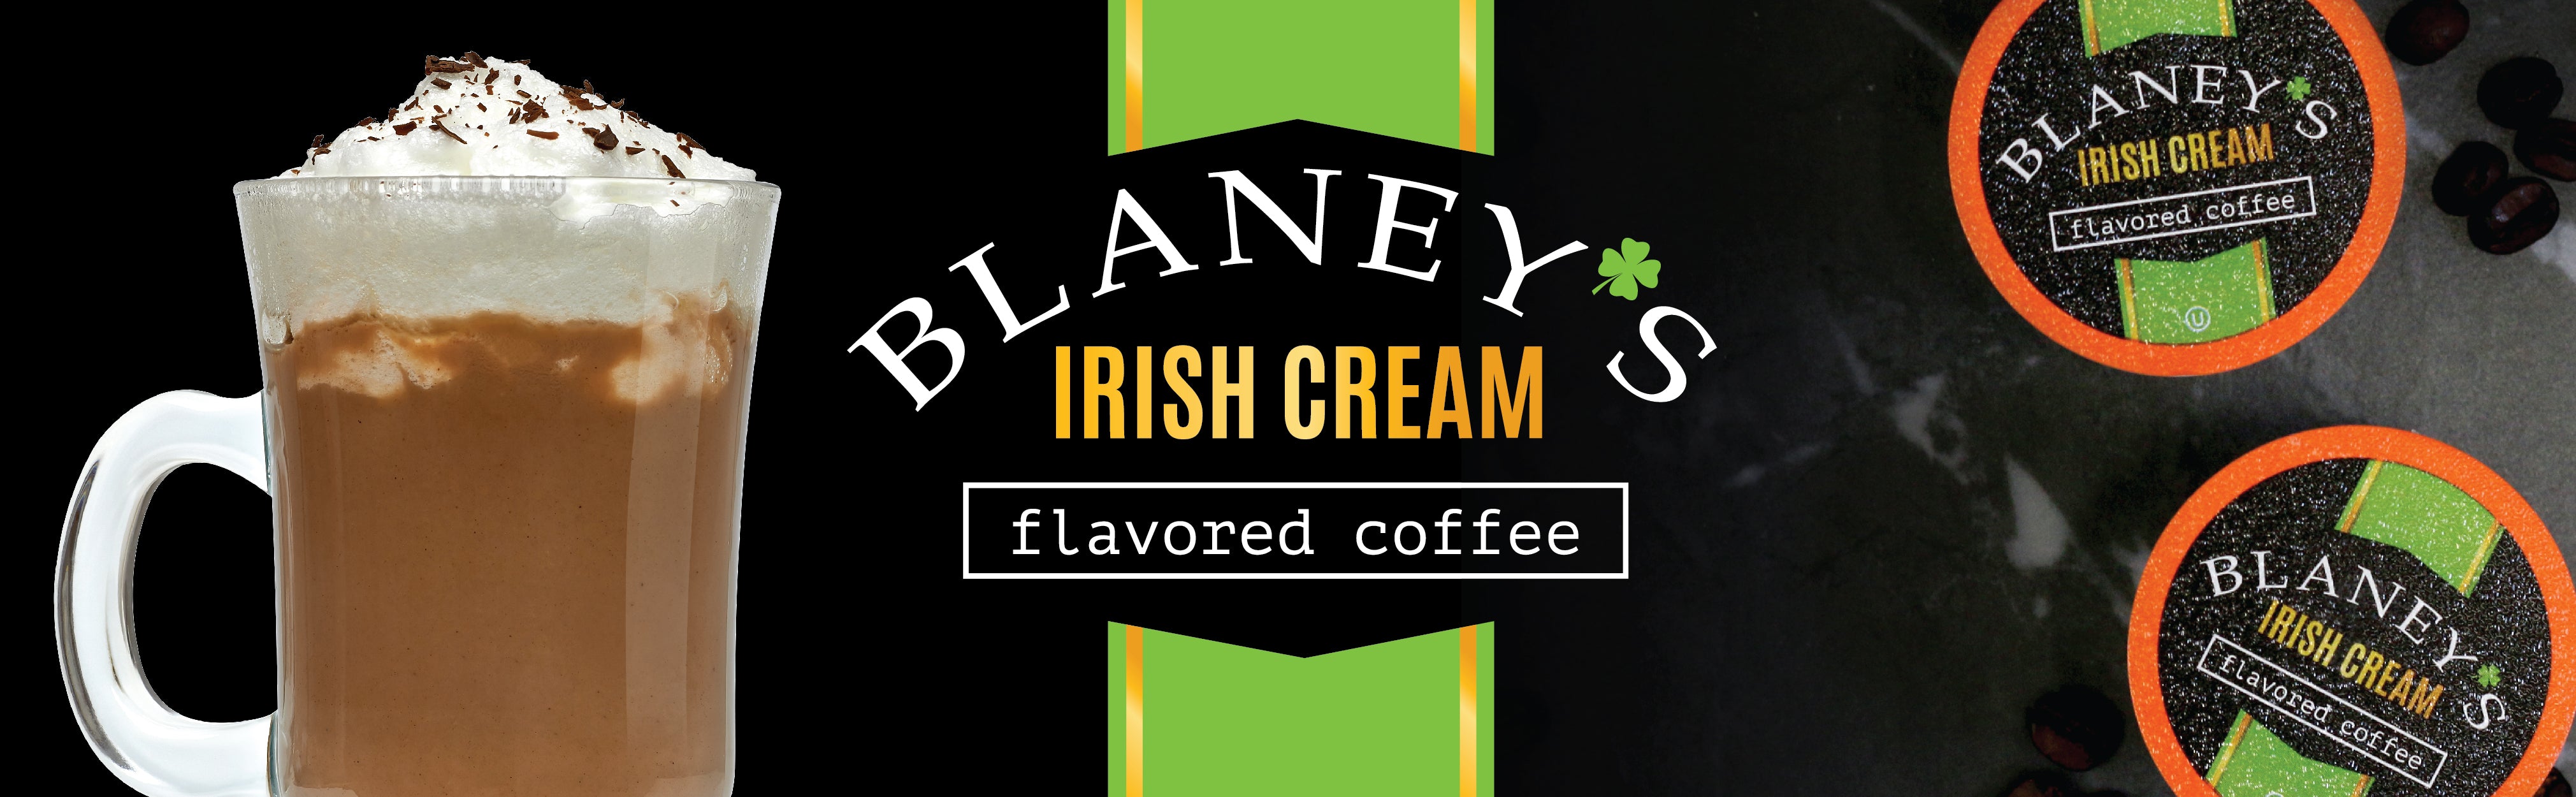 Blaney's Irish Cream Flavored Coffee Kcup Coffee Pods